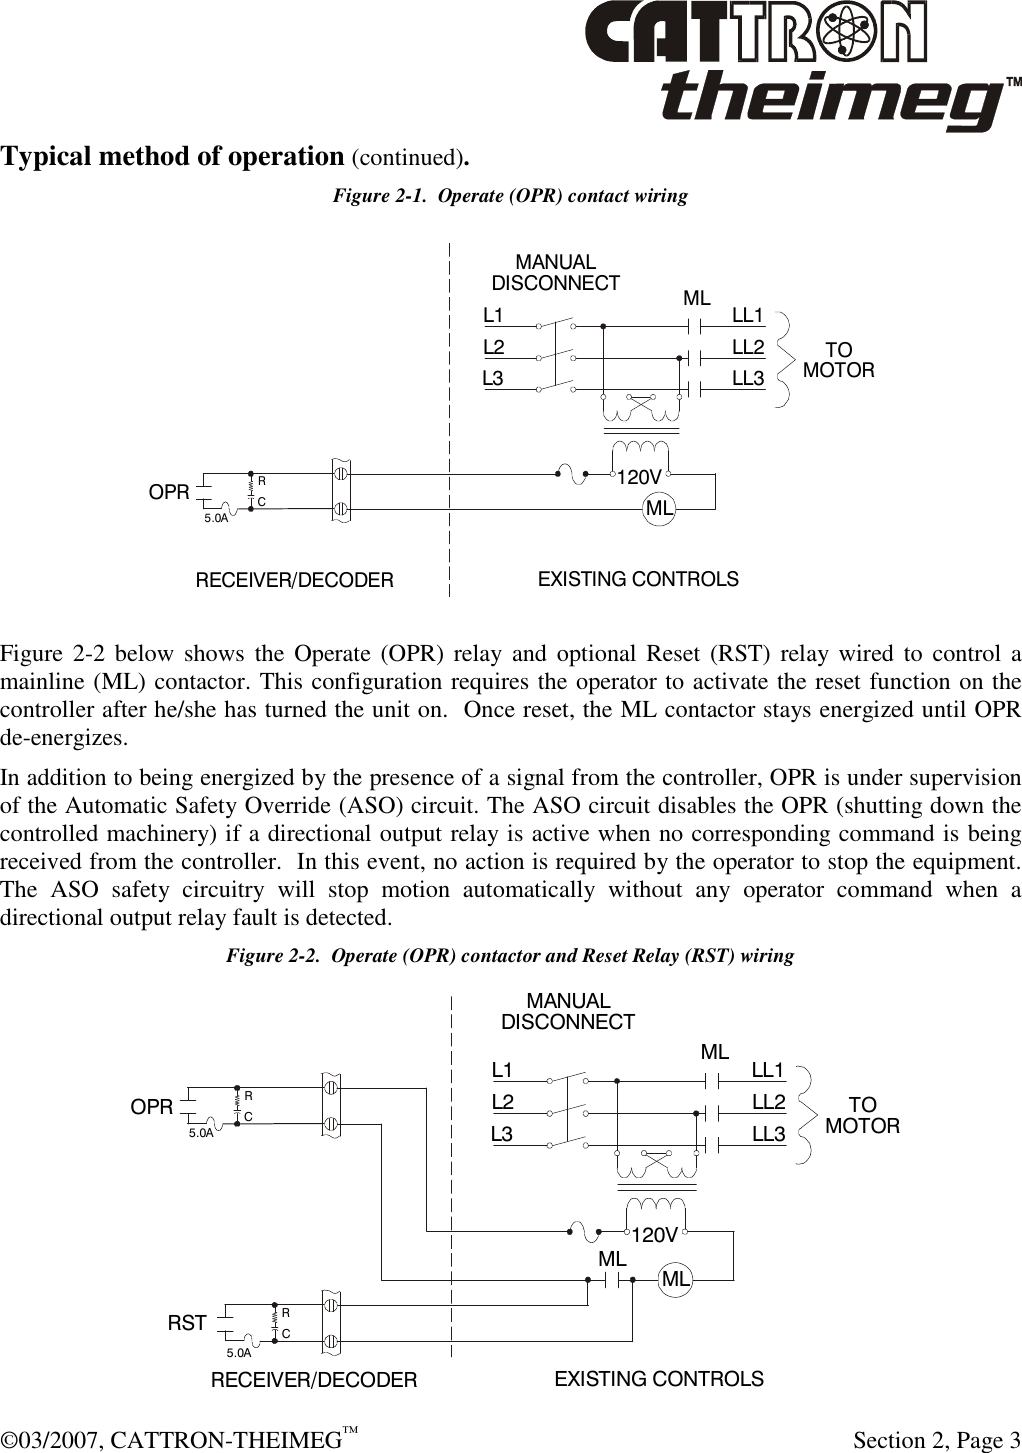  ©03/2007, CATTRON-THEIMEG™     Section 2, Page 3 Typical method of operation (continued).  Figure 2-1.  Operate (OPR) contact wiring   Figure 2-2  below  shows  the Operate  (OPR) relay  and optional Reset  (RST)  relay  wired  to control  a mainline (ML) contactor. This configuration requires the operator to activate the reset function on the controller after he/she has turned the unit on.  Once reset, the ML contactor stays energized until OPR de-energizes.  In addition to being energized by the presence of a signal from the controller, OPR is under supervision of the Automatic Safety Override (ASO) circuit. The ASO circuit disables the OPR (shutting down the controlled machinery) if a directional output relay is active when no corresponding command is being received from the controller.  In this event, no action is required by the operator to stop the equipment. The  ASO  safety  circuitry  will  stop  motion  automatically  without  any  operator  command  when  a directional output relay fault is detected. Figure 2-2.  Operate (OPR) contactor and Reset Relay (RST) wiring  120VL1 MLMLMANUALDISCONNECTL2L3 LL1LL2LL3 TOMOTORRECEIVER/DECODEREXISTING CONTROLS OPRRC5.0AOPR120VRSTRRCC5.0A5.0AL1 MLML MLMANUALDISCONNECTL2L3 LL1LL2LL3 TOMOTORRECEIVER/DECODEREXISTING CONTROLS 